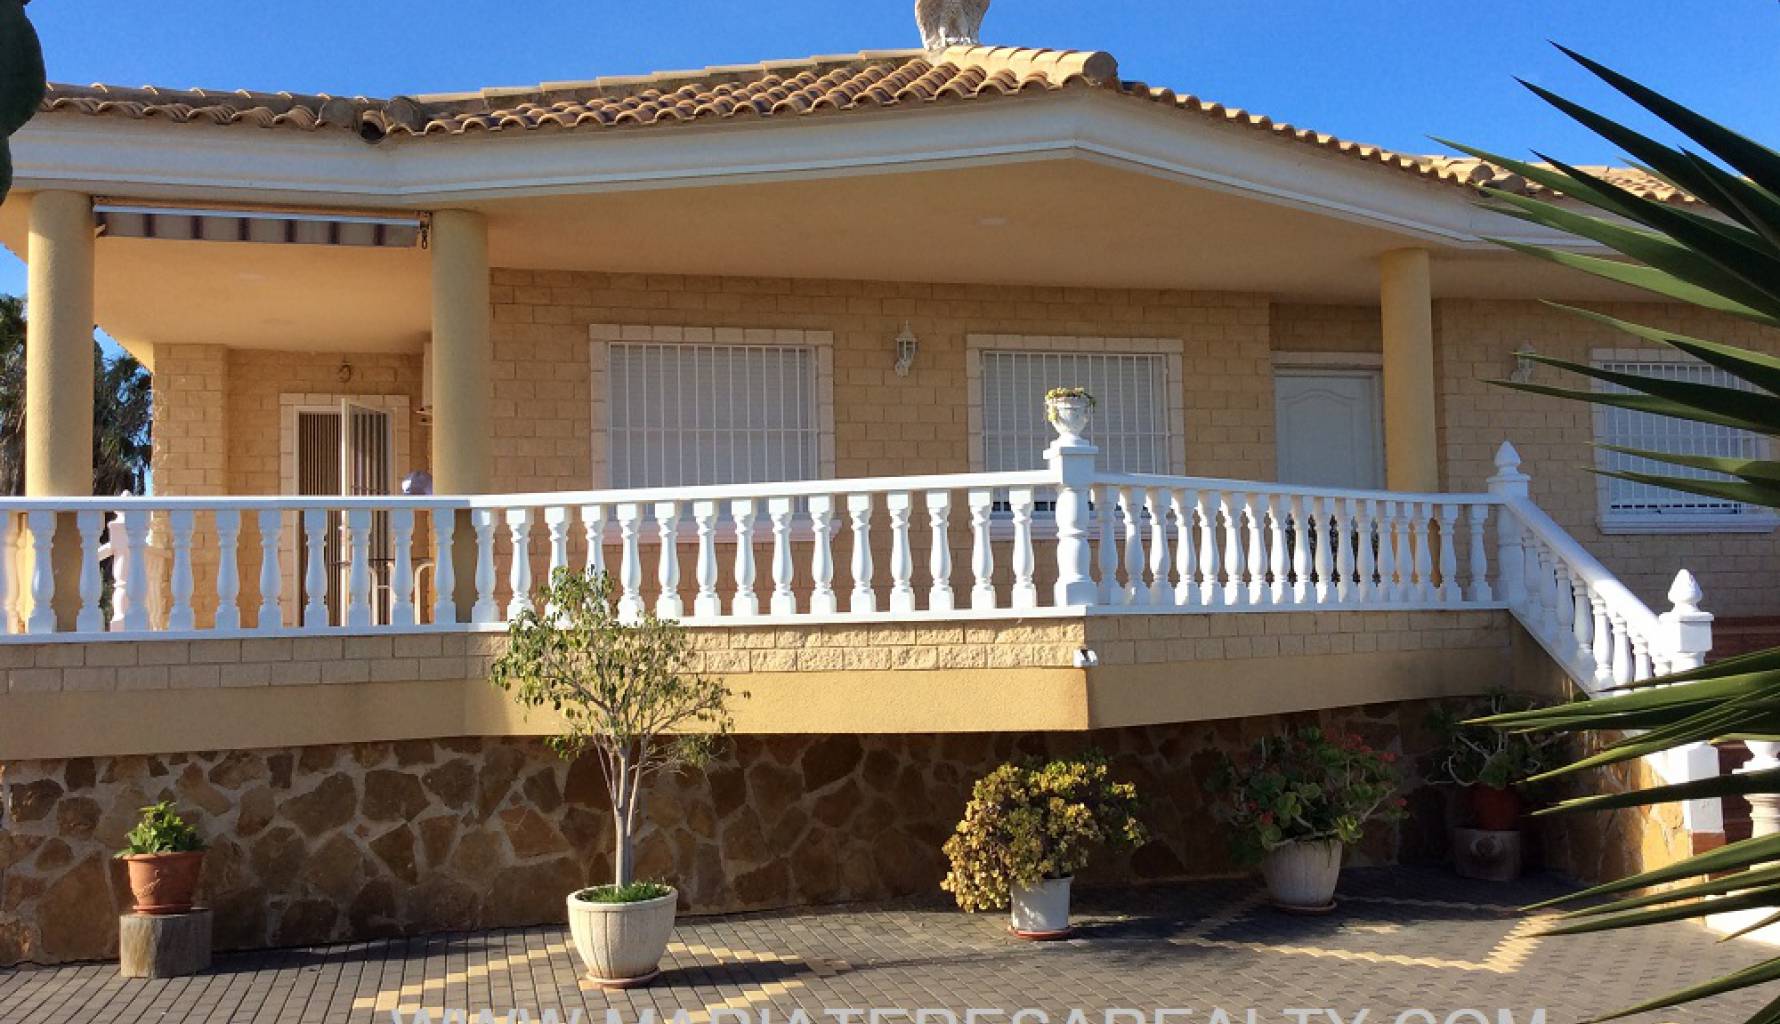 Sale - Country house - Valle del Sol